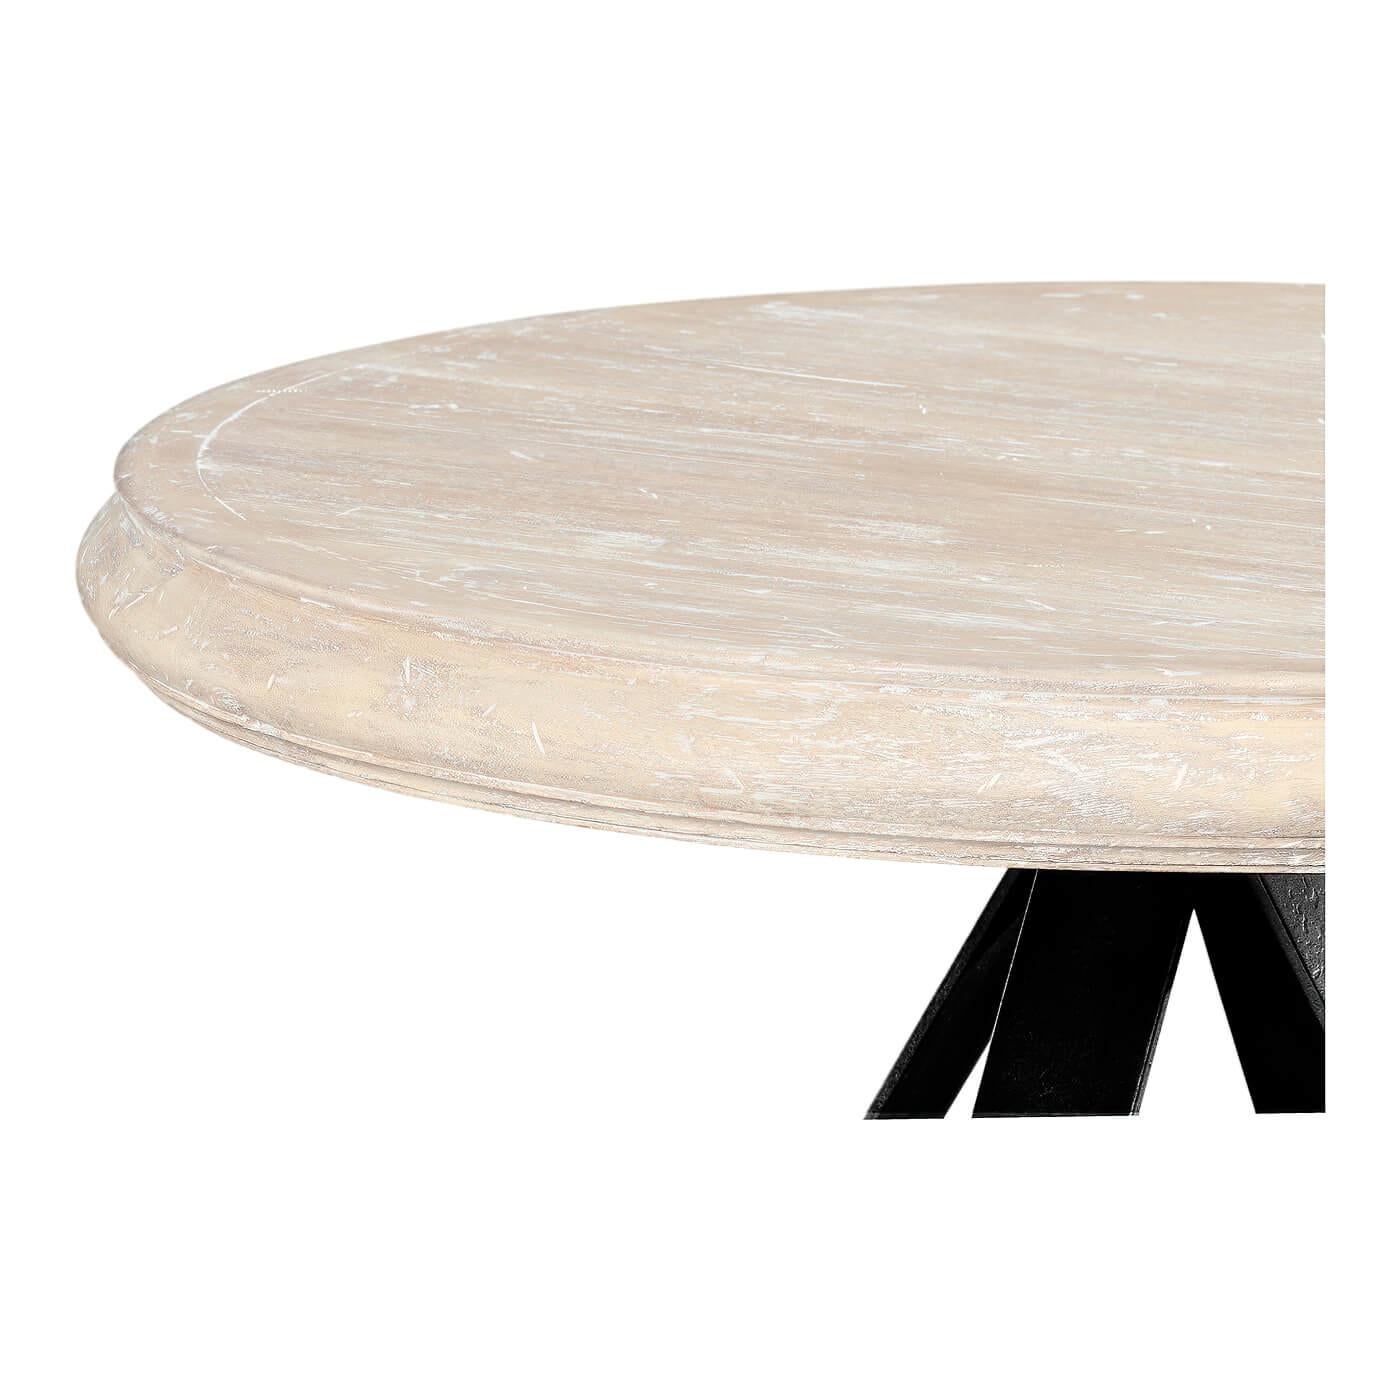 European Rustic Round Limed Side Table